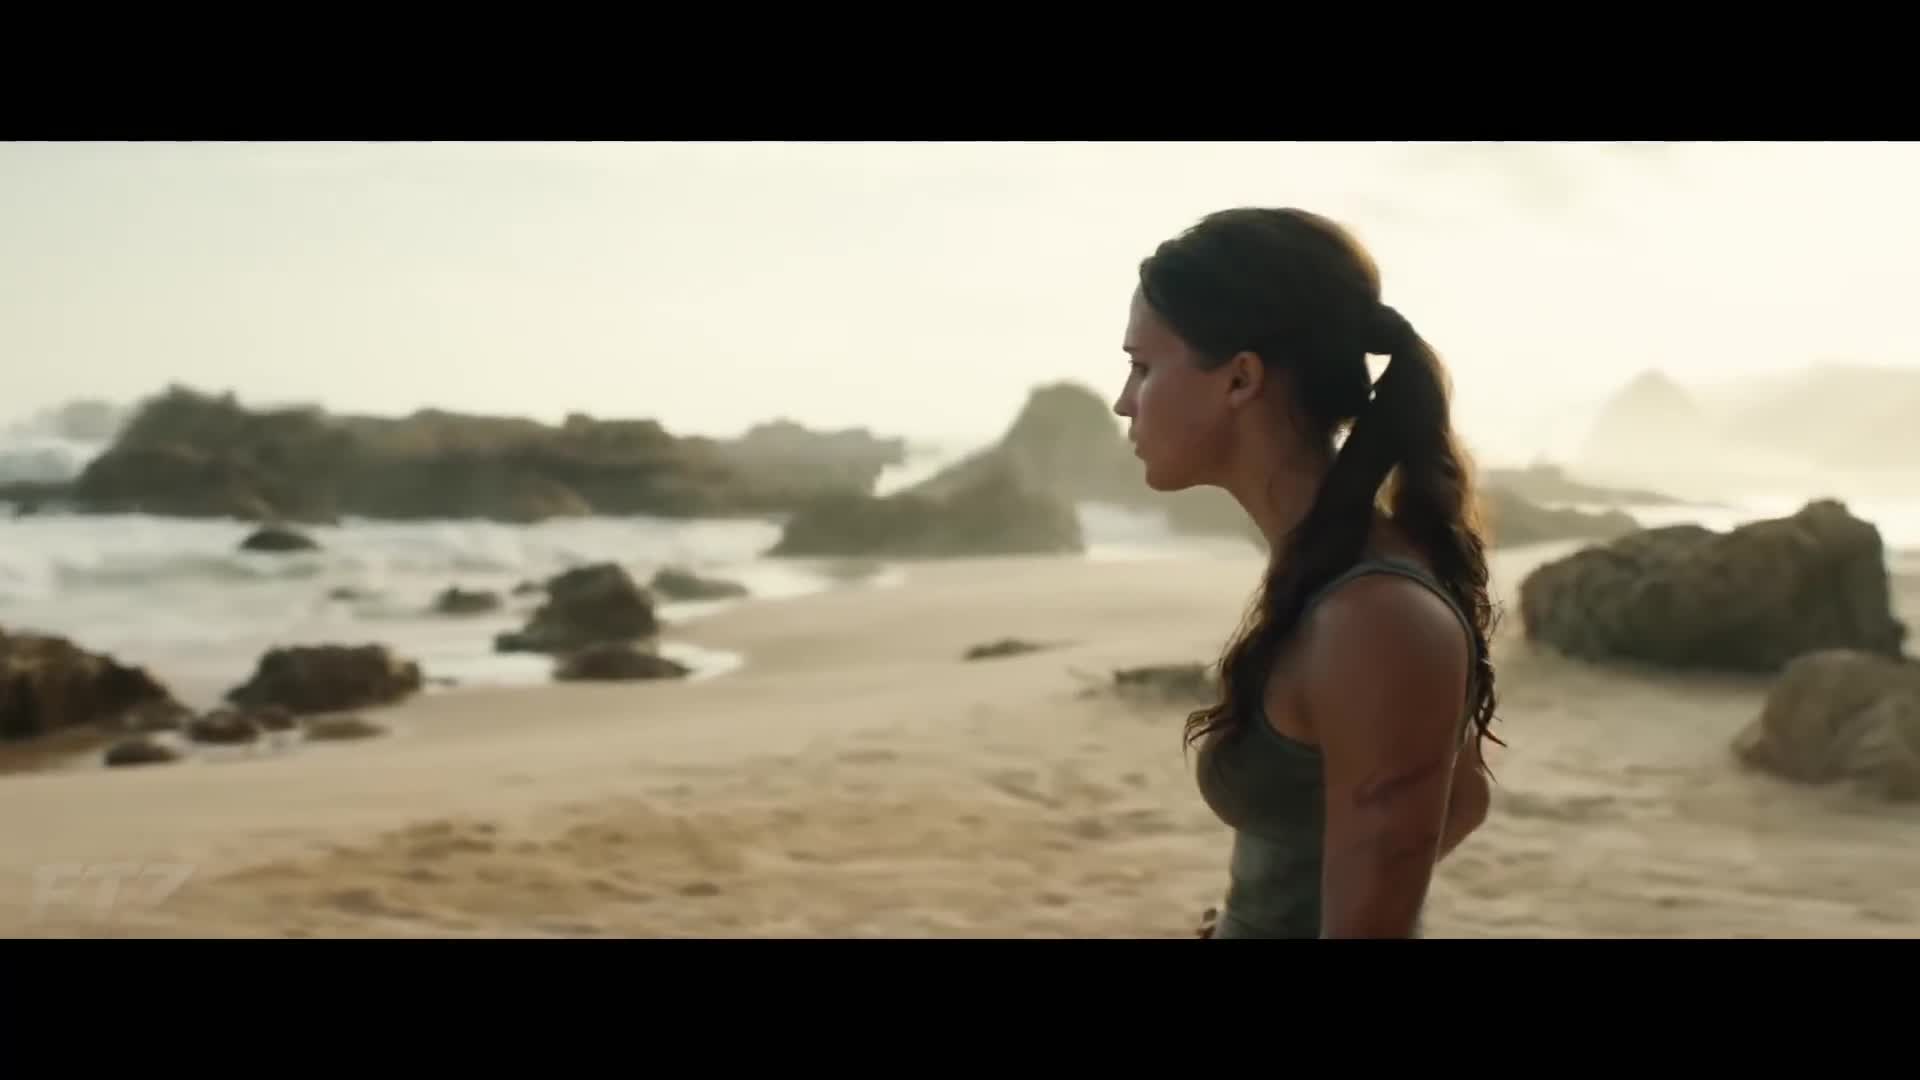 Tomb Raider - Official Trailer 2 (2018)